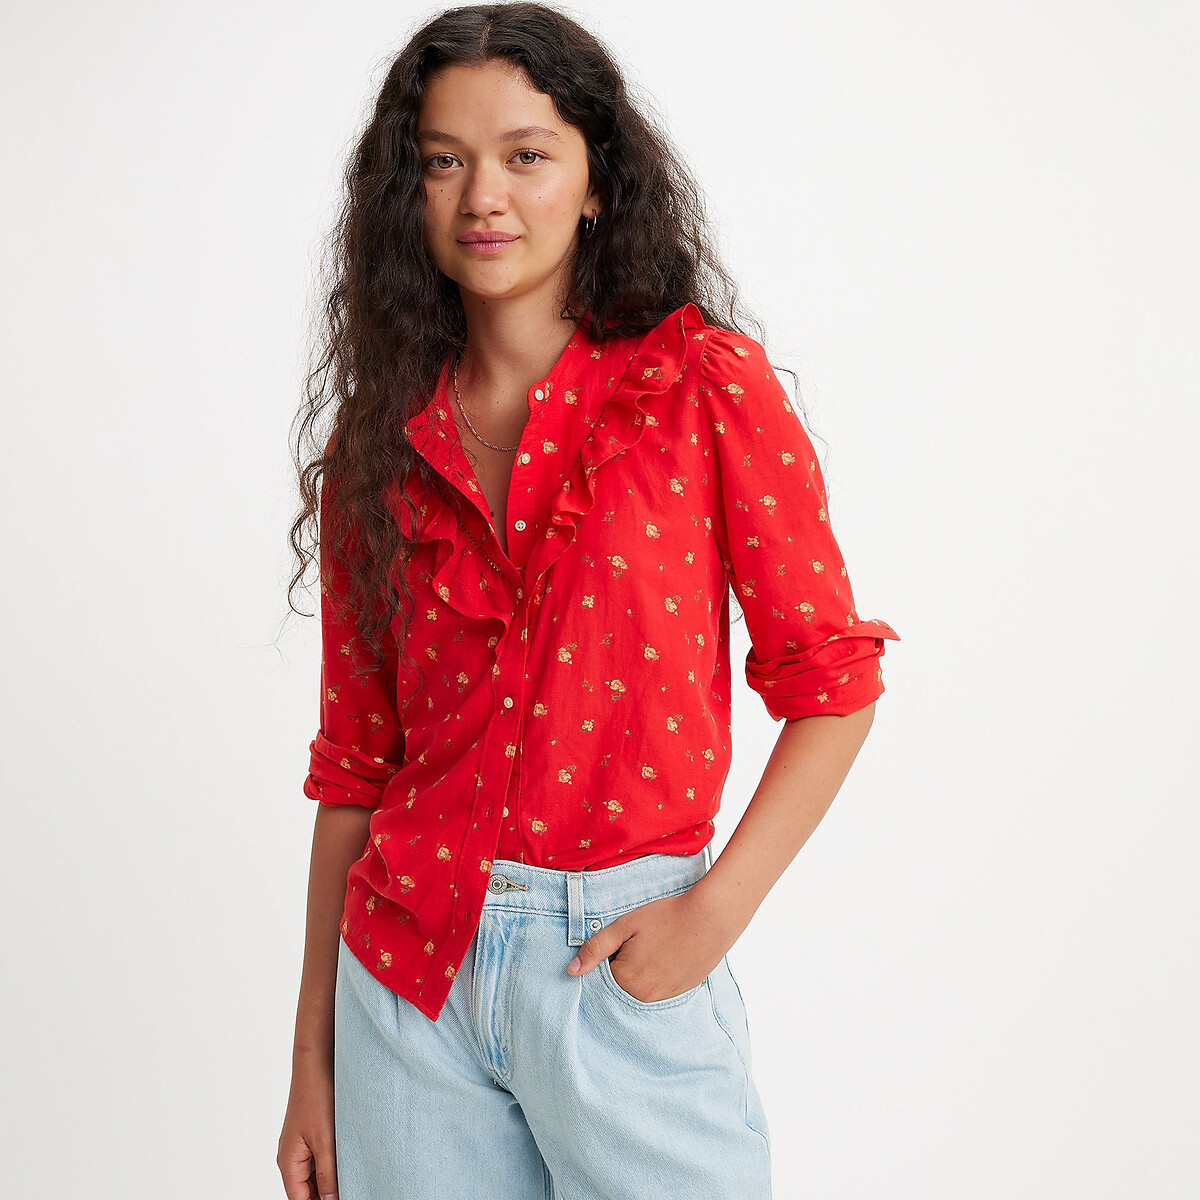 Carina Floral Print Blouse in Linen Mix